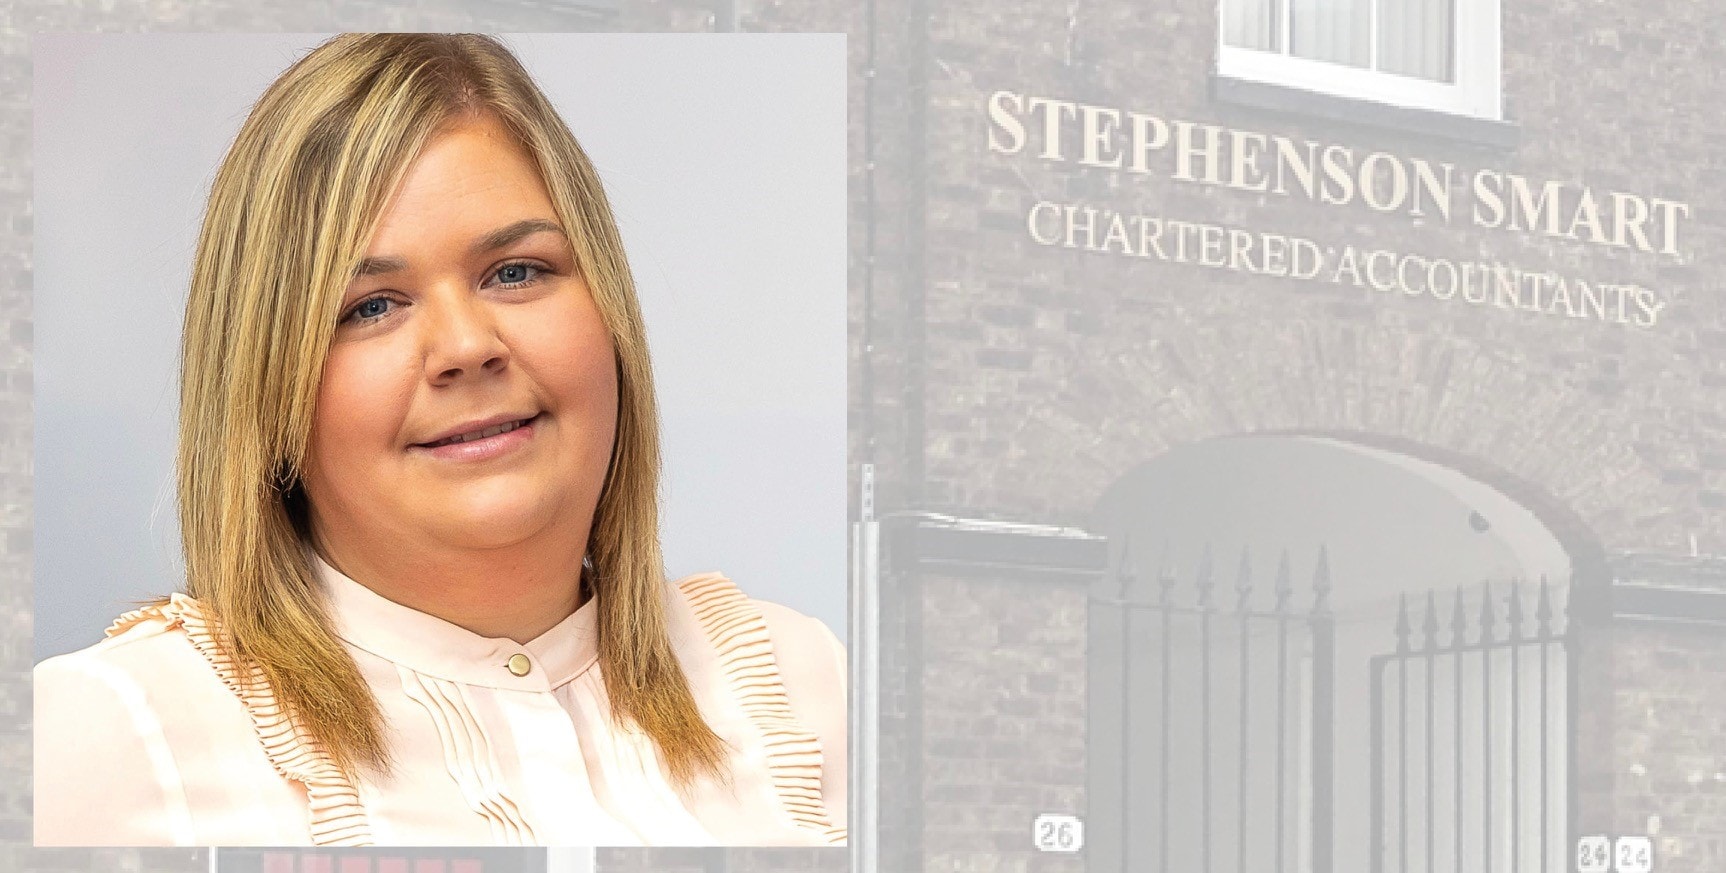 Capital Gains Tax changes with Kayleigh Wilson of Stephenson Smart